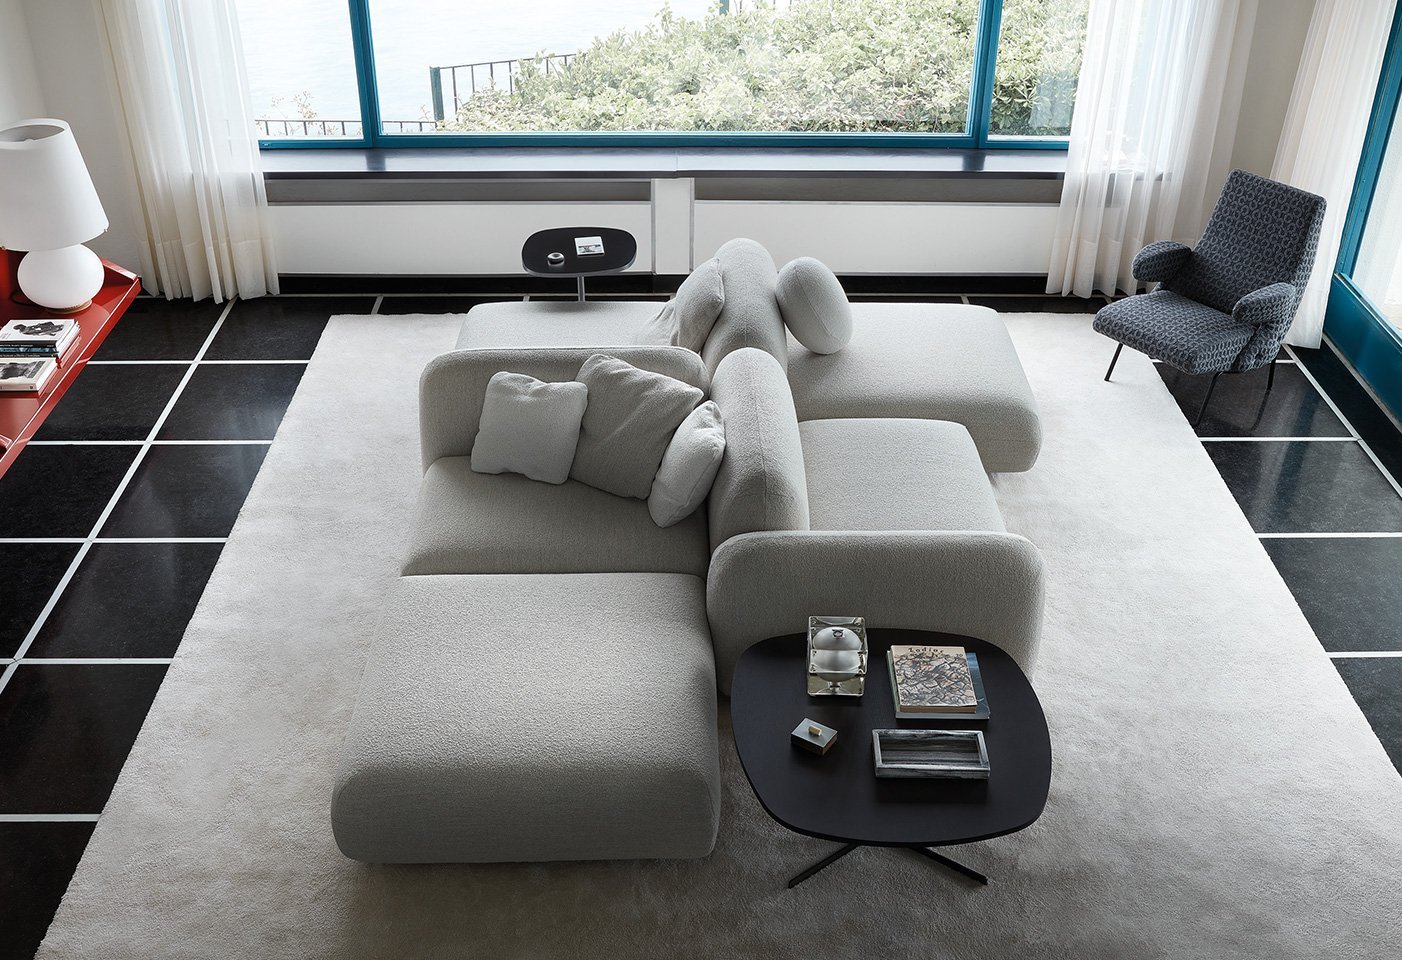 The Tokio sofa by Swedish designers Claesson Koivisto Rune for Arflex has generous proportions and a friendly, soft but still very architectural geometry. Photo c/o Arflex. 